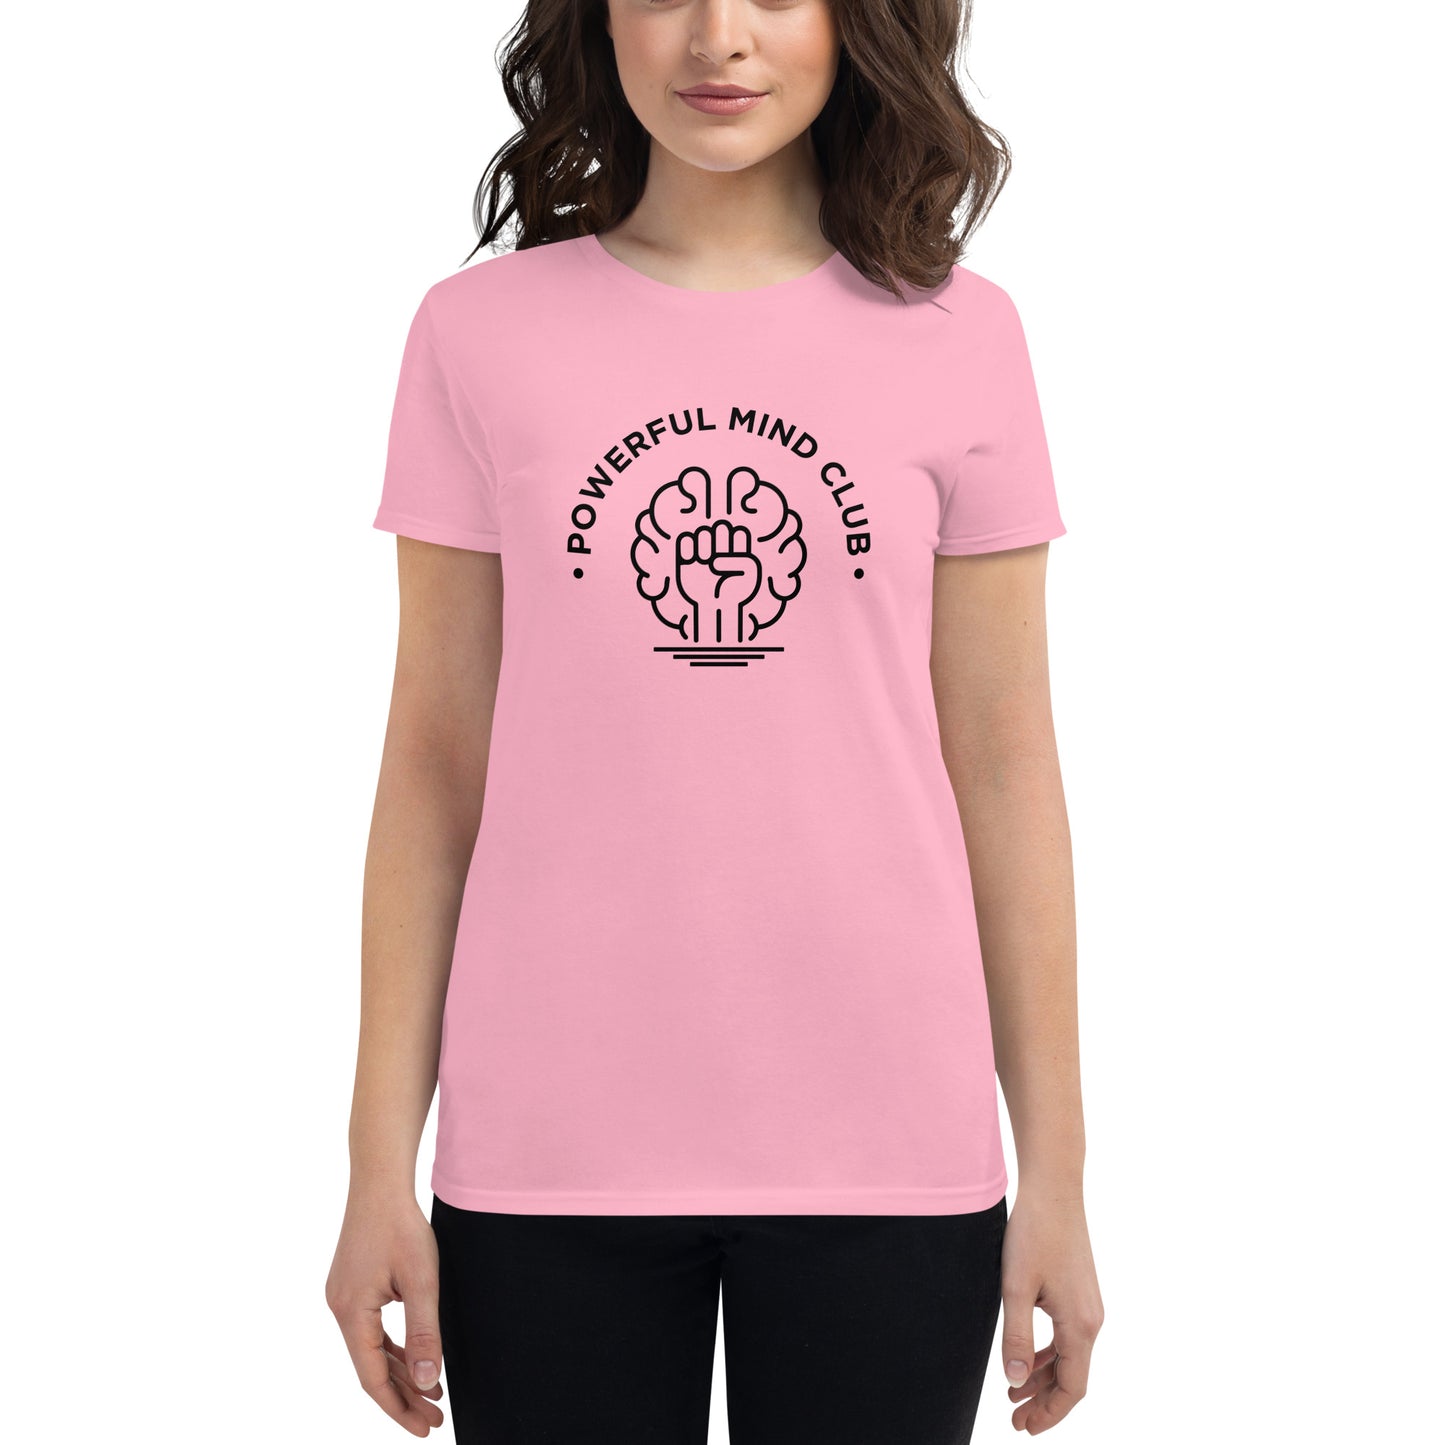 Powerful Mind Club™ Women's Fitted t-shirt